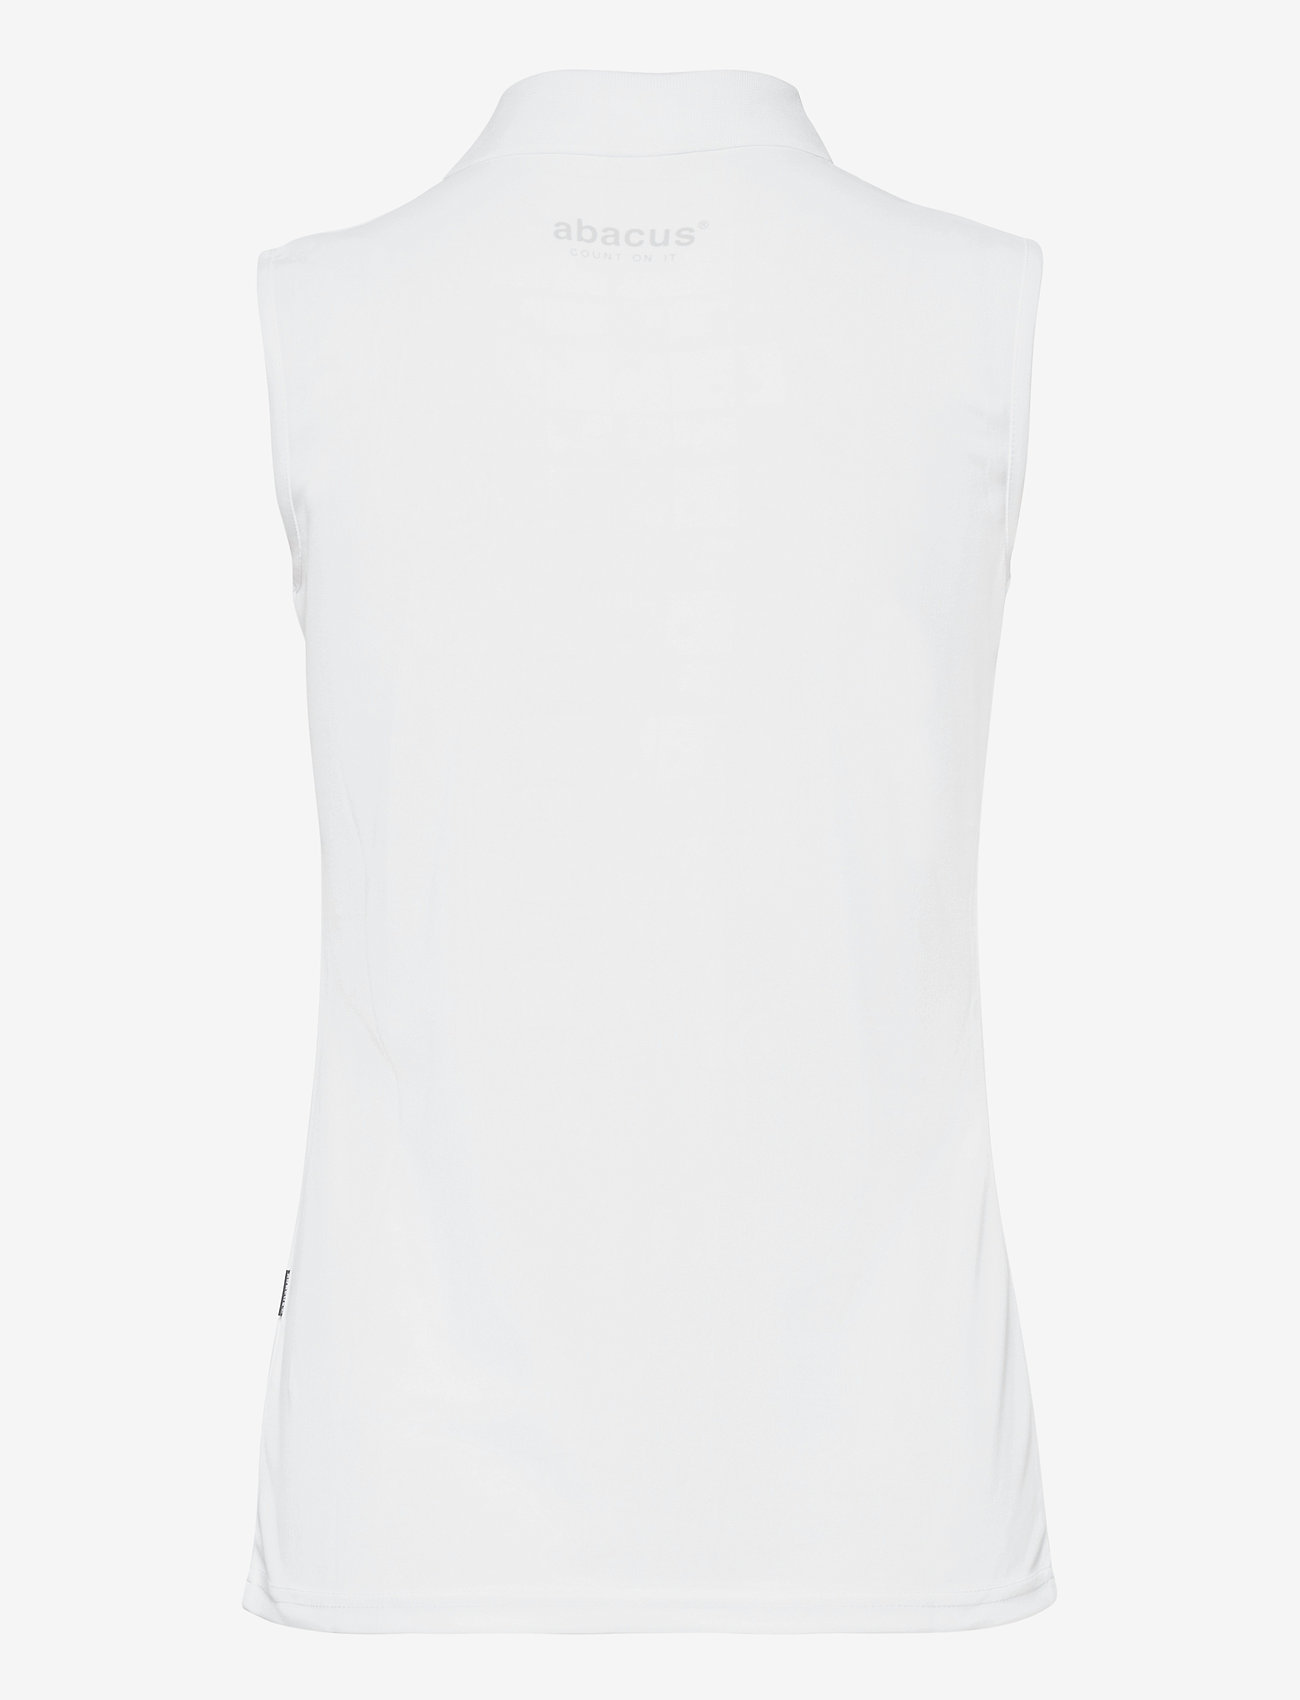 Abacus - Lds Cray sleeveless - polos - white - 1